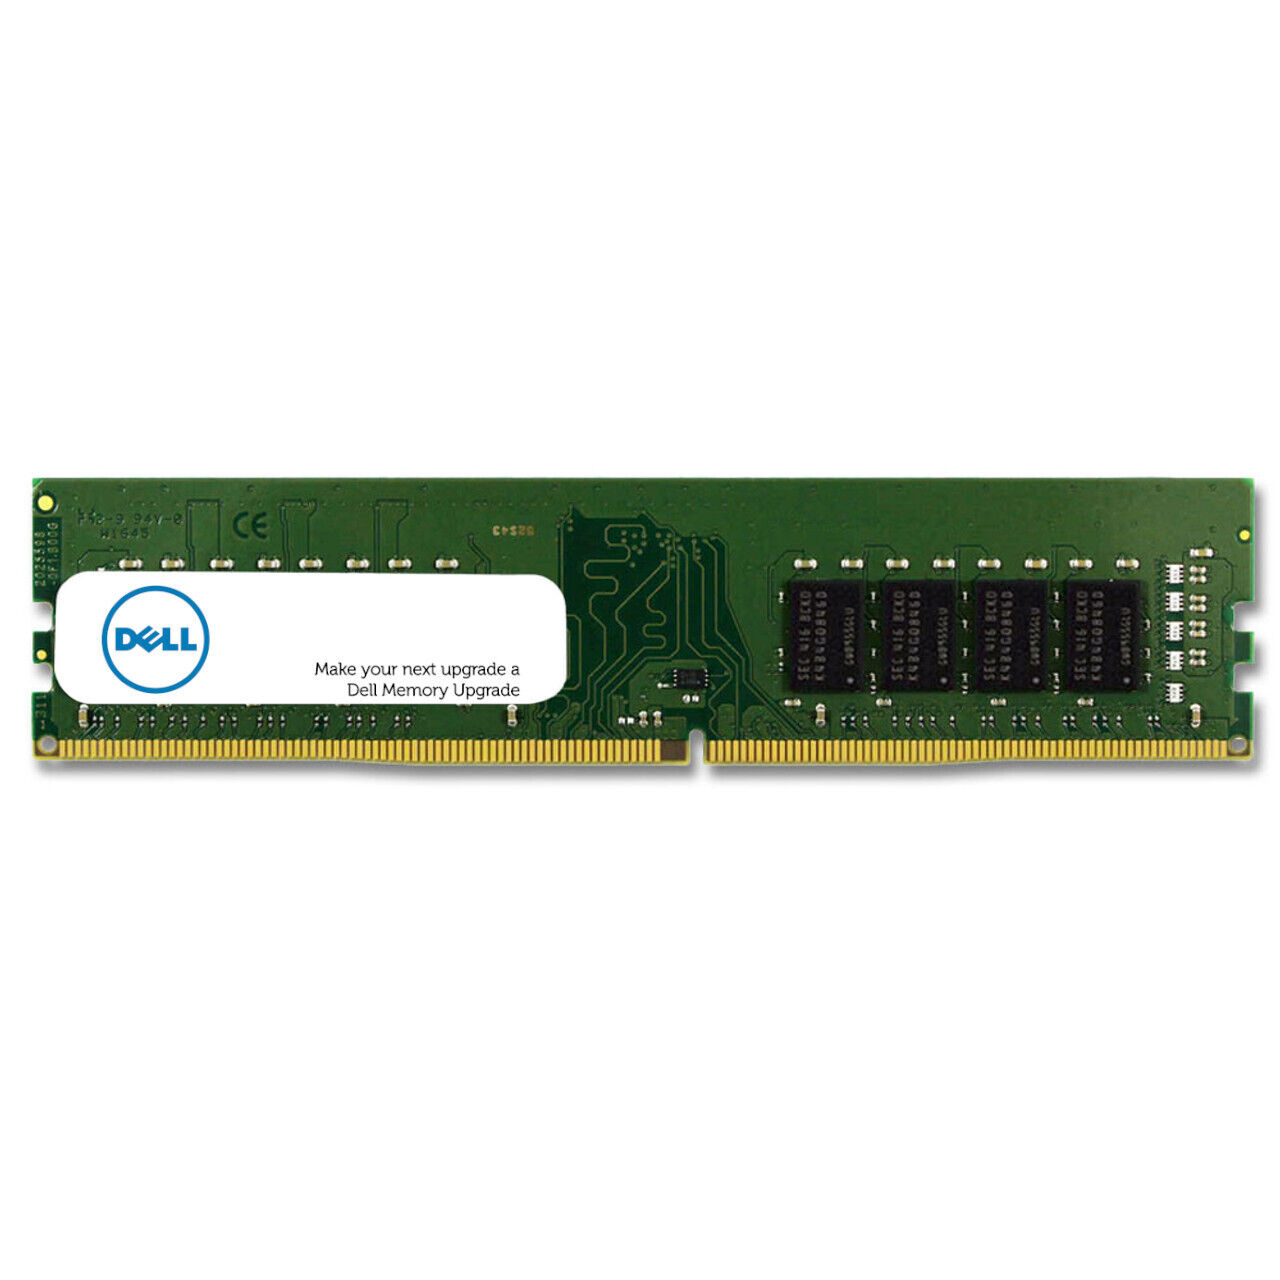 Dell Memory SNPCND02C/4G AA086414 4GB 1Rx8 DDR4 UDIMM 2666MHz RAM